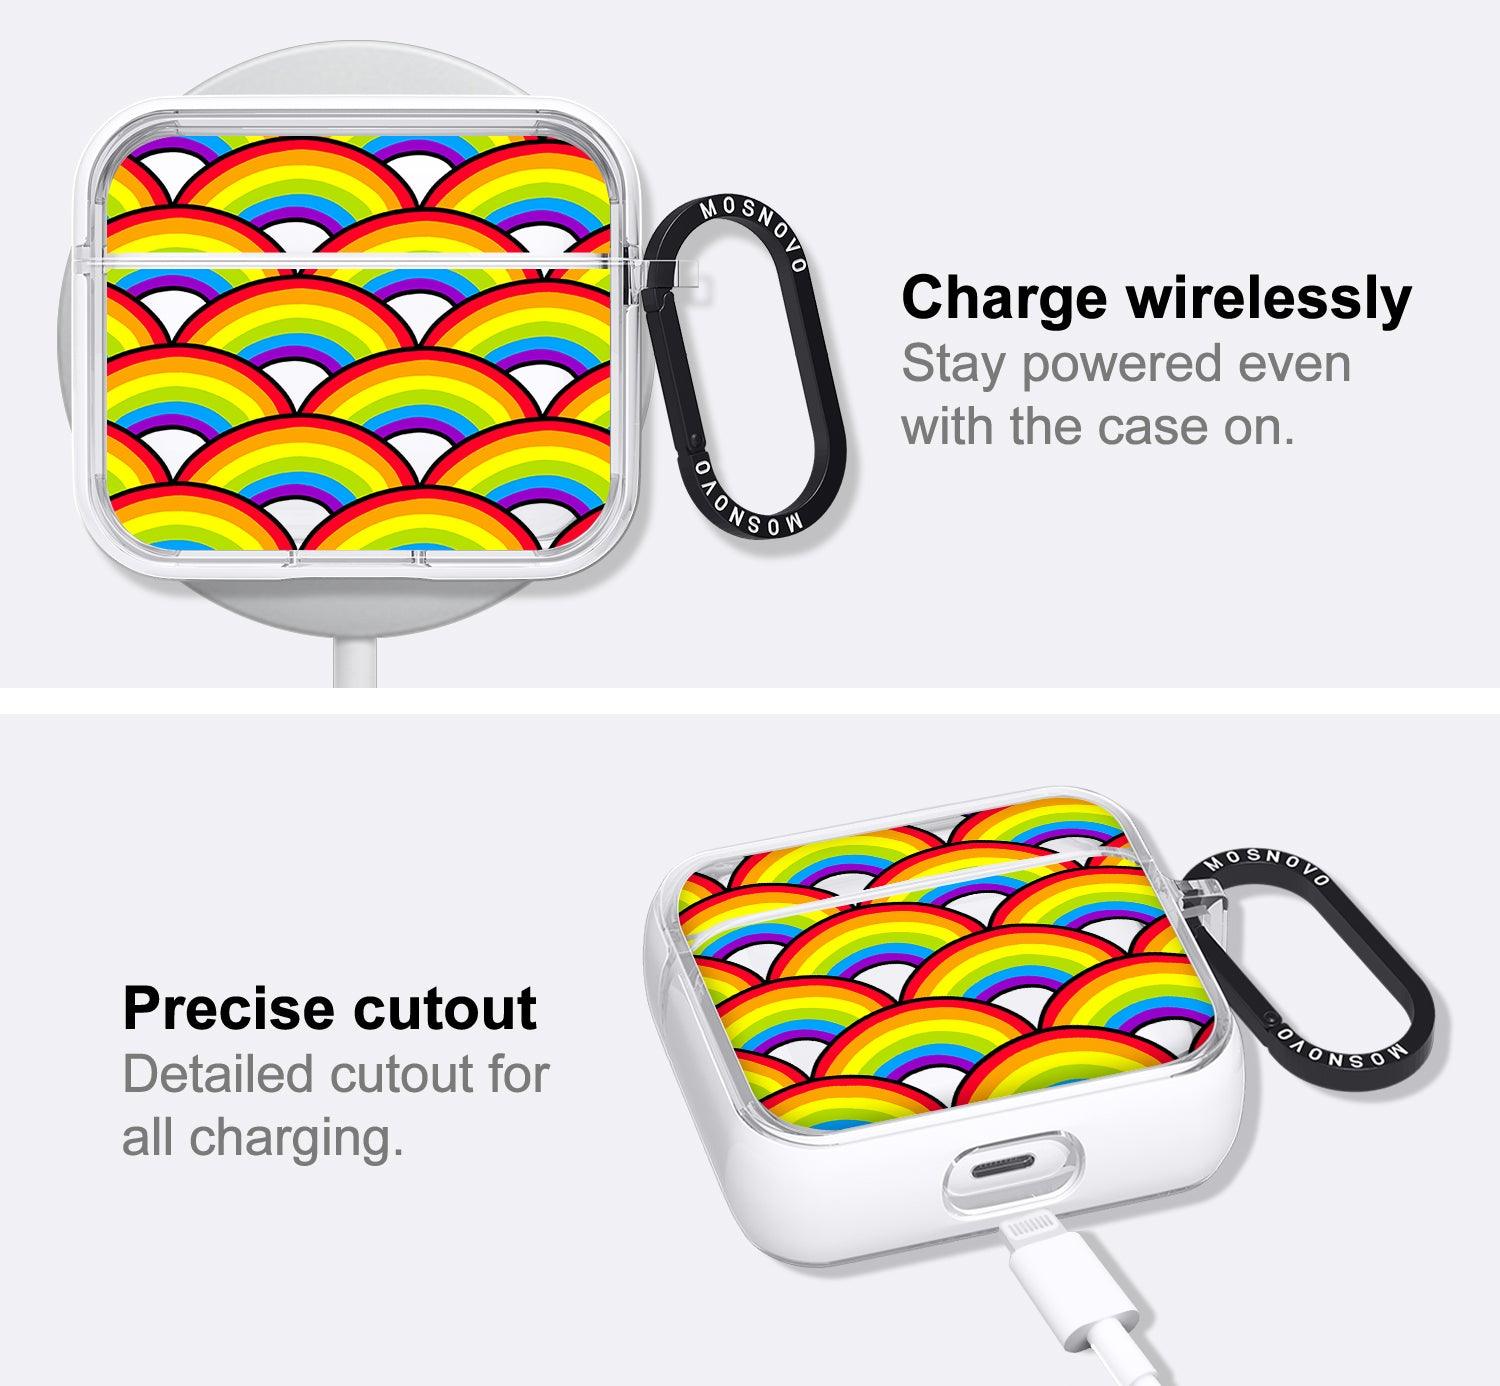 Rainbow Waves AirPods 3 Case (3rd Generation) - MOSNOVO